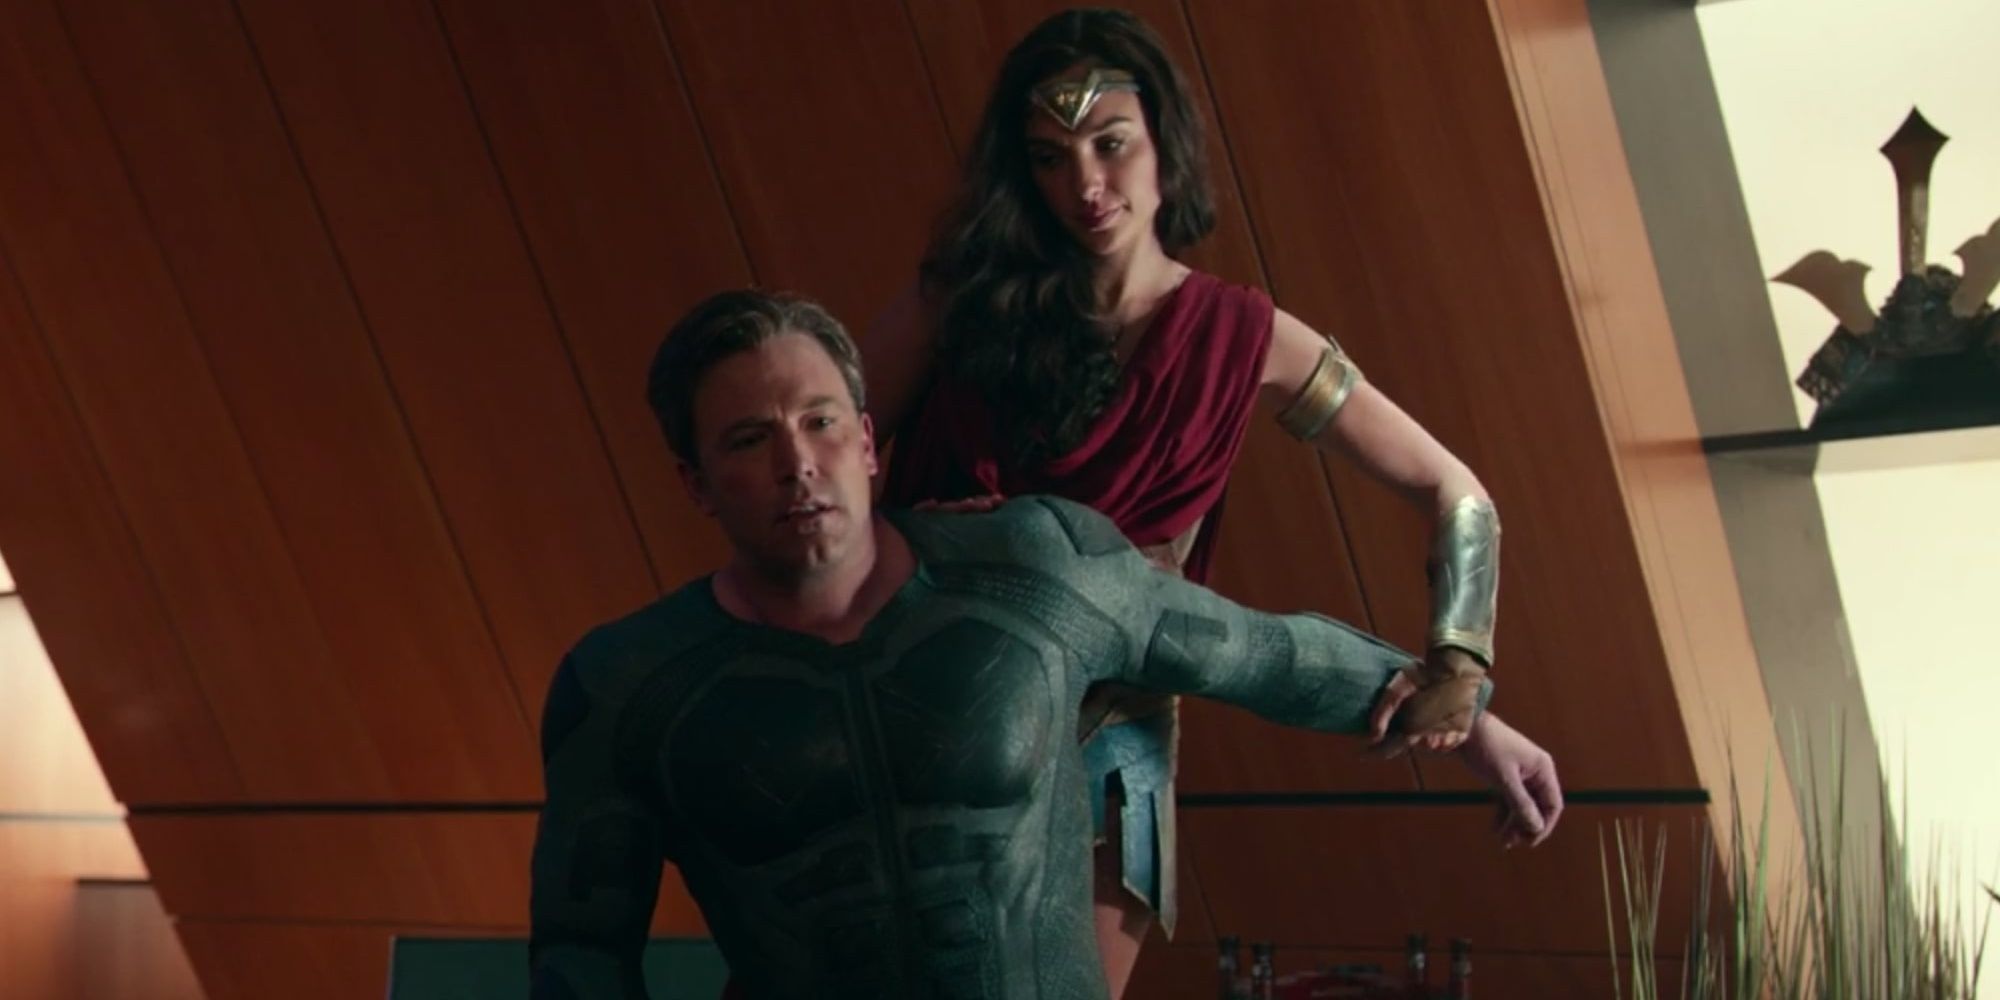 Diana helping Bruce with his injured arm in the Batcave